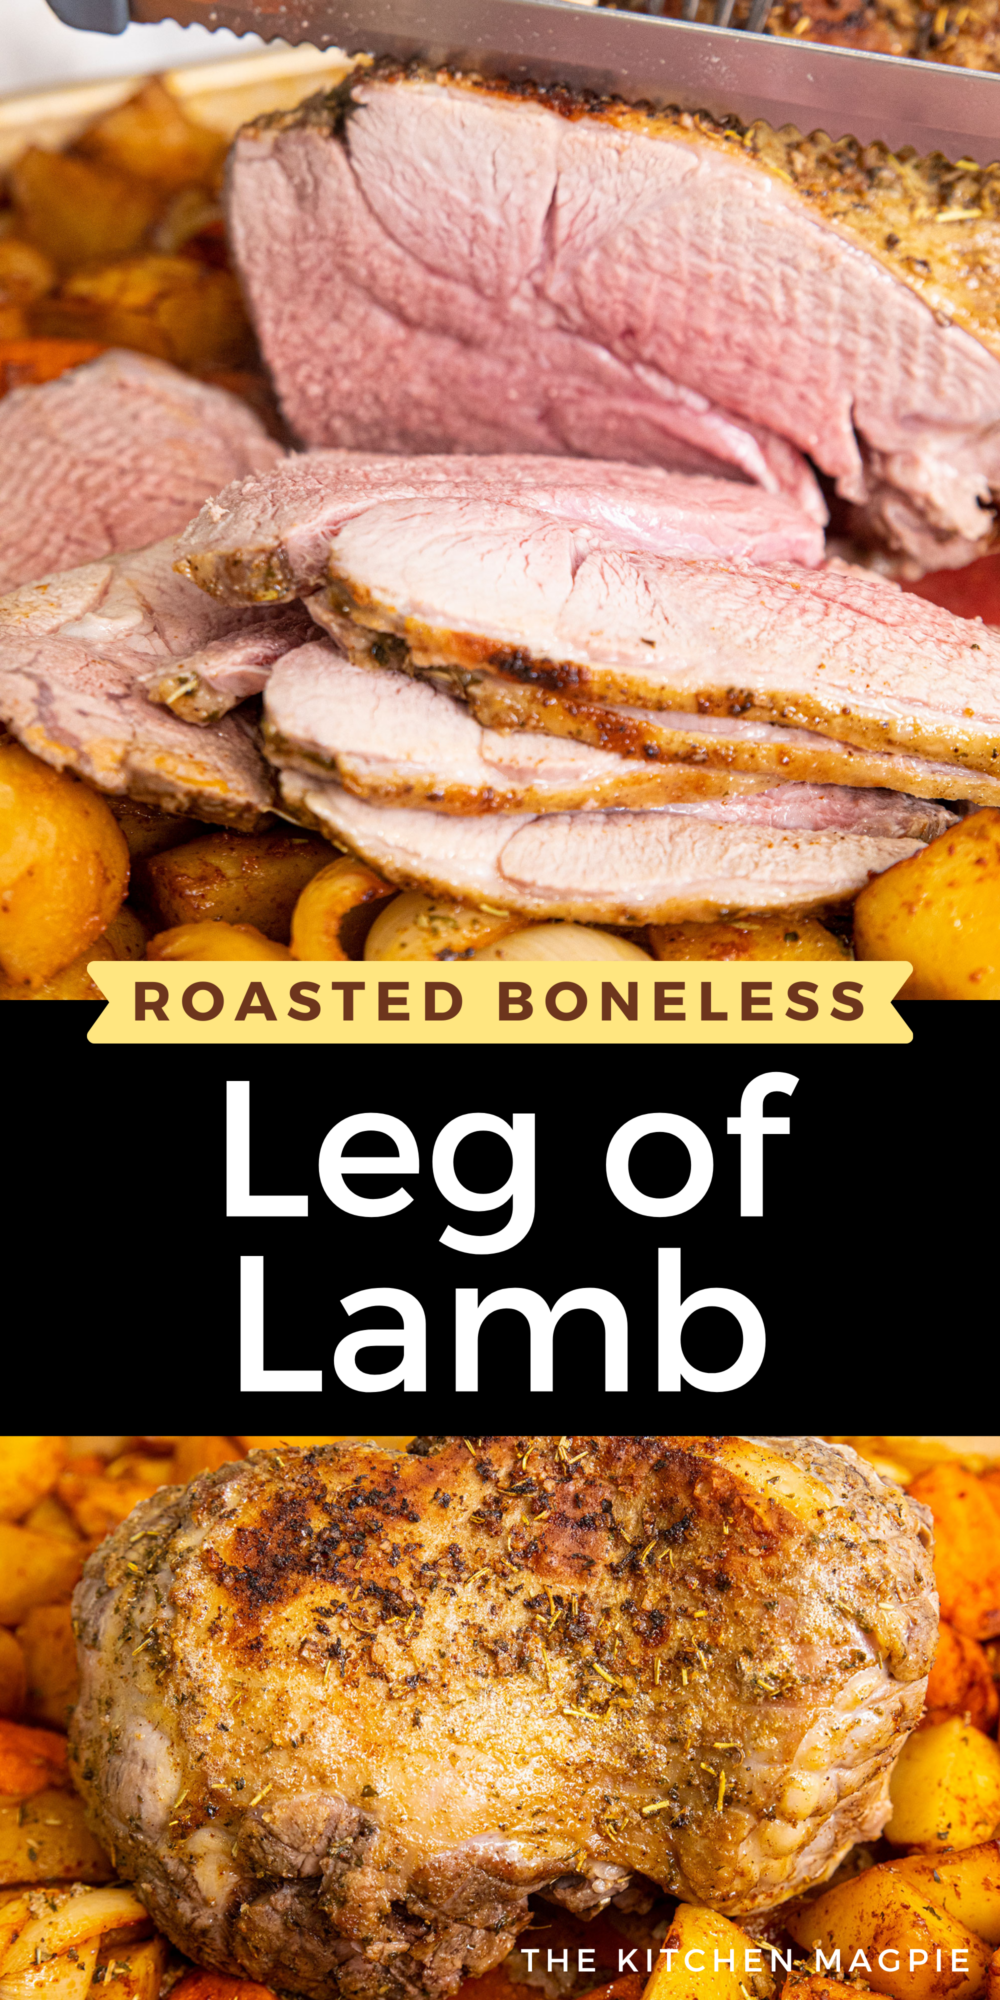 Boneless leg of lamb is covered with butter and lamb seasoning and then roasted on a baking sheet with vegetables for an easy and delicious one-pan mea